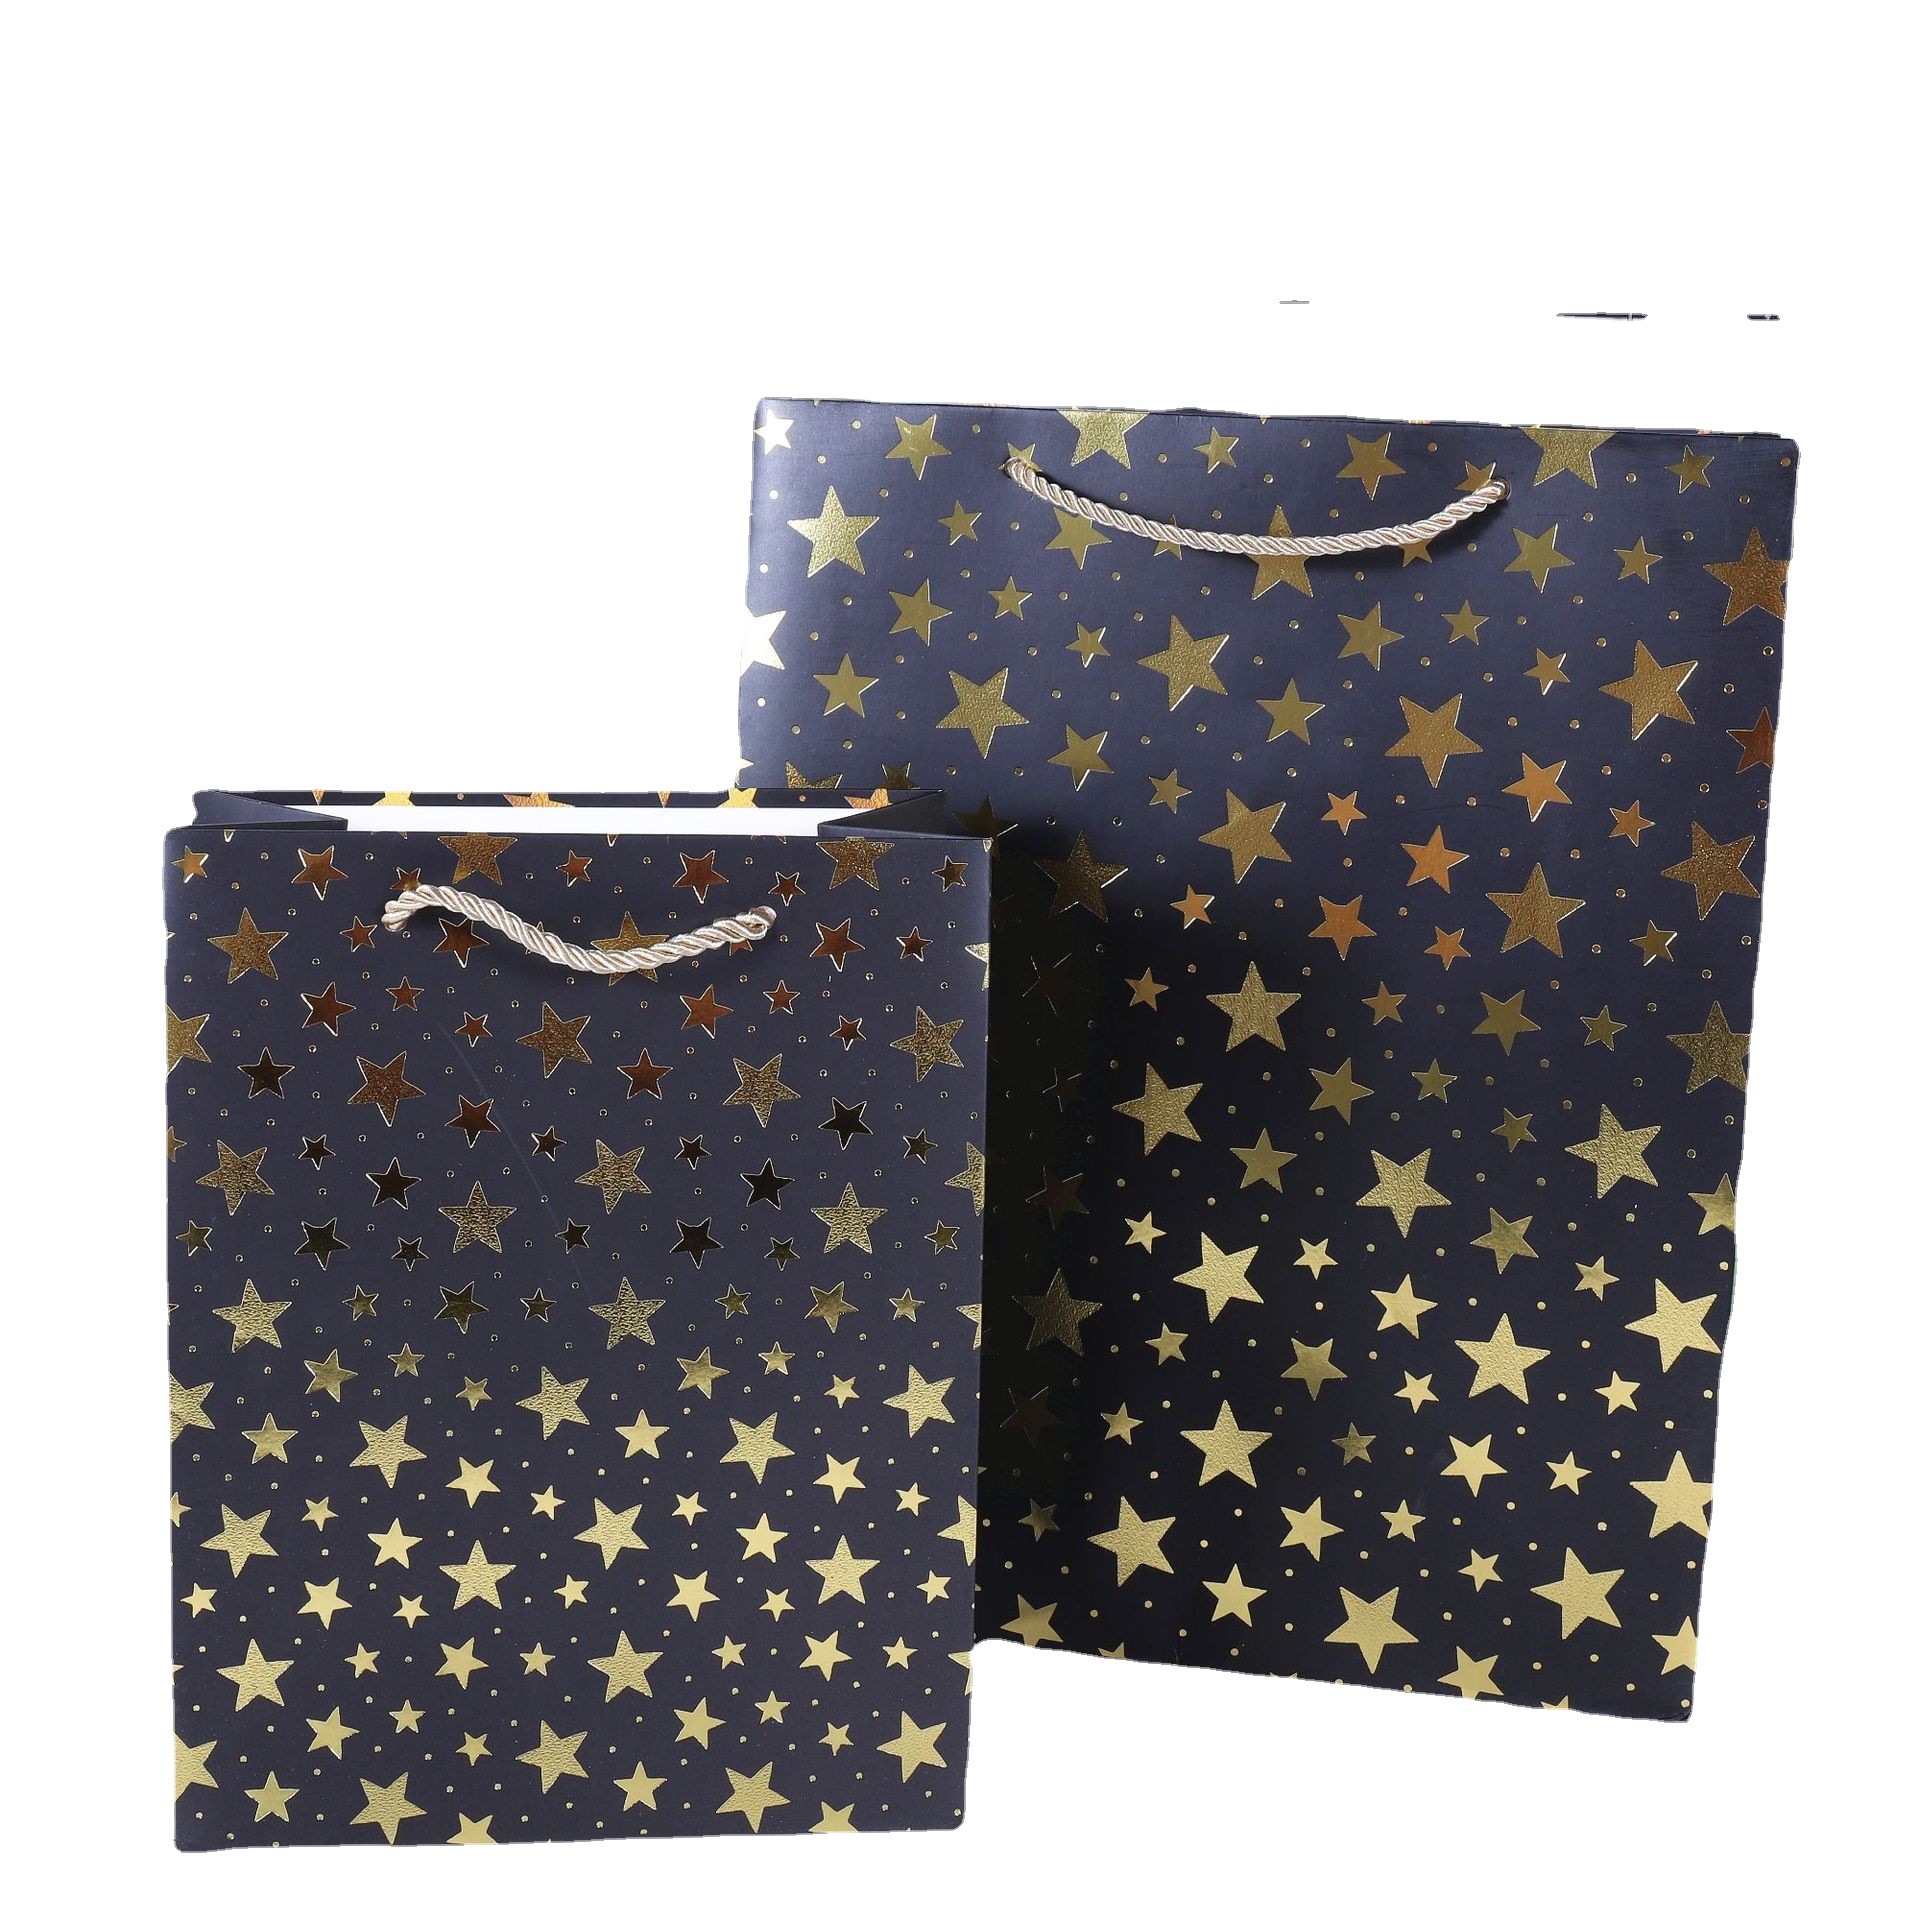 Gilding Five-Pointed Star Paper Gift Handbag Full Version XINGX White Card Gift Bag Exclusive for Cross-Border Paper Bag in Stock